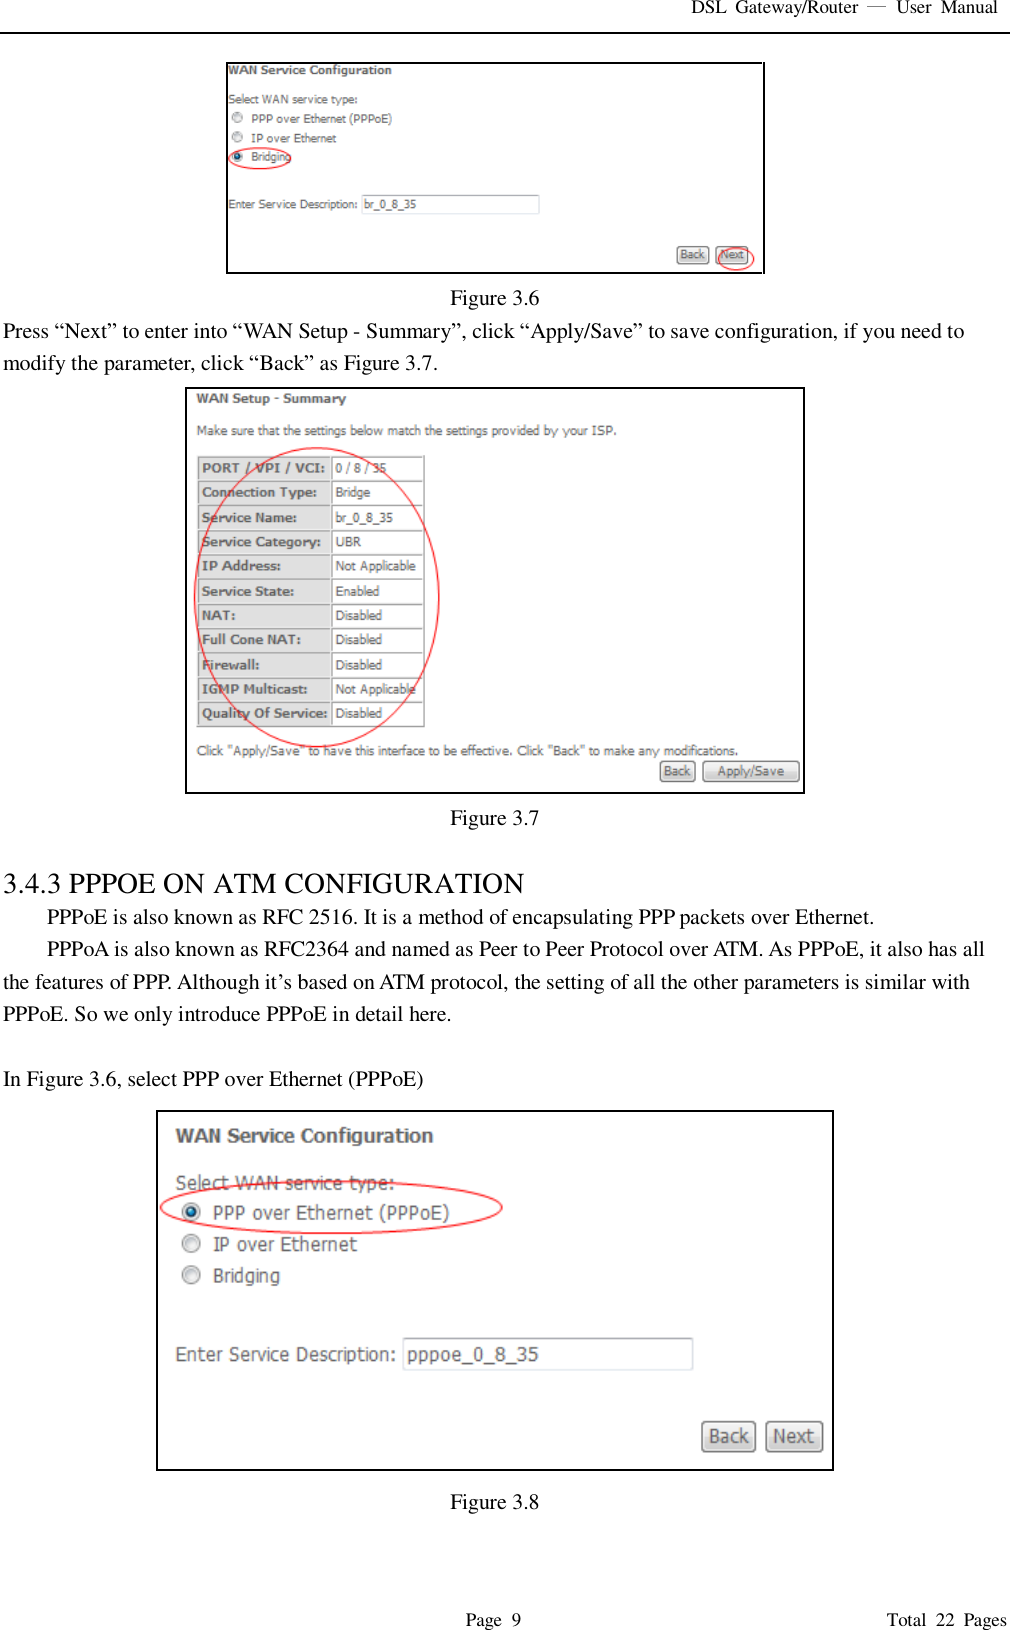 DSL  Gateway/Router    User  Manual   Page  9                                                                              Total  22  Pages  Figure 3.6 Press “Next” to enter into “WAN Setup - Summary”, click “Apply/Save” to save configuration, if you need to modify the parameter, click “Back” as Figure 3.7.    Figure 3.7  3.4.3 PPPOE ON ATM CONFIGURATION   PPPoE is also known as RFC 2516. It is a method of encapsulating PPP packets over Ethernet. PPPoA is also known as RFC2364 and named as Peer to Peer Protocol over ATM. As PPPoE, it also has all the features of PPP. Although it’s based on ATM protocol, the setting of all the other parameters is similar with PPPoE. So we only introduce PPPoE in detail here.    In Figure 3.6, select PPP over Ethernet (PPPoE)  Figure 3.8  